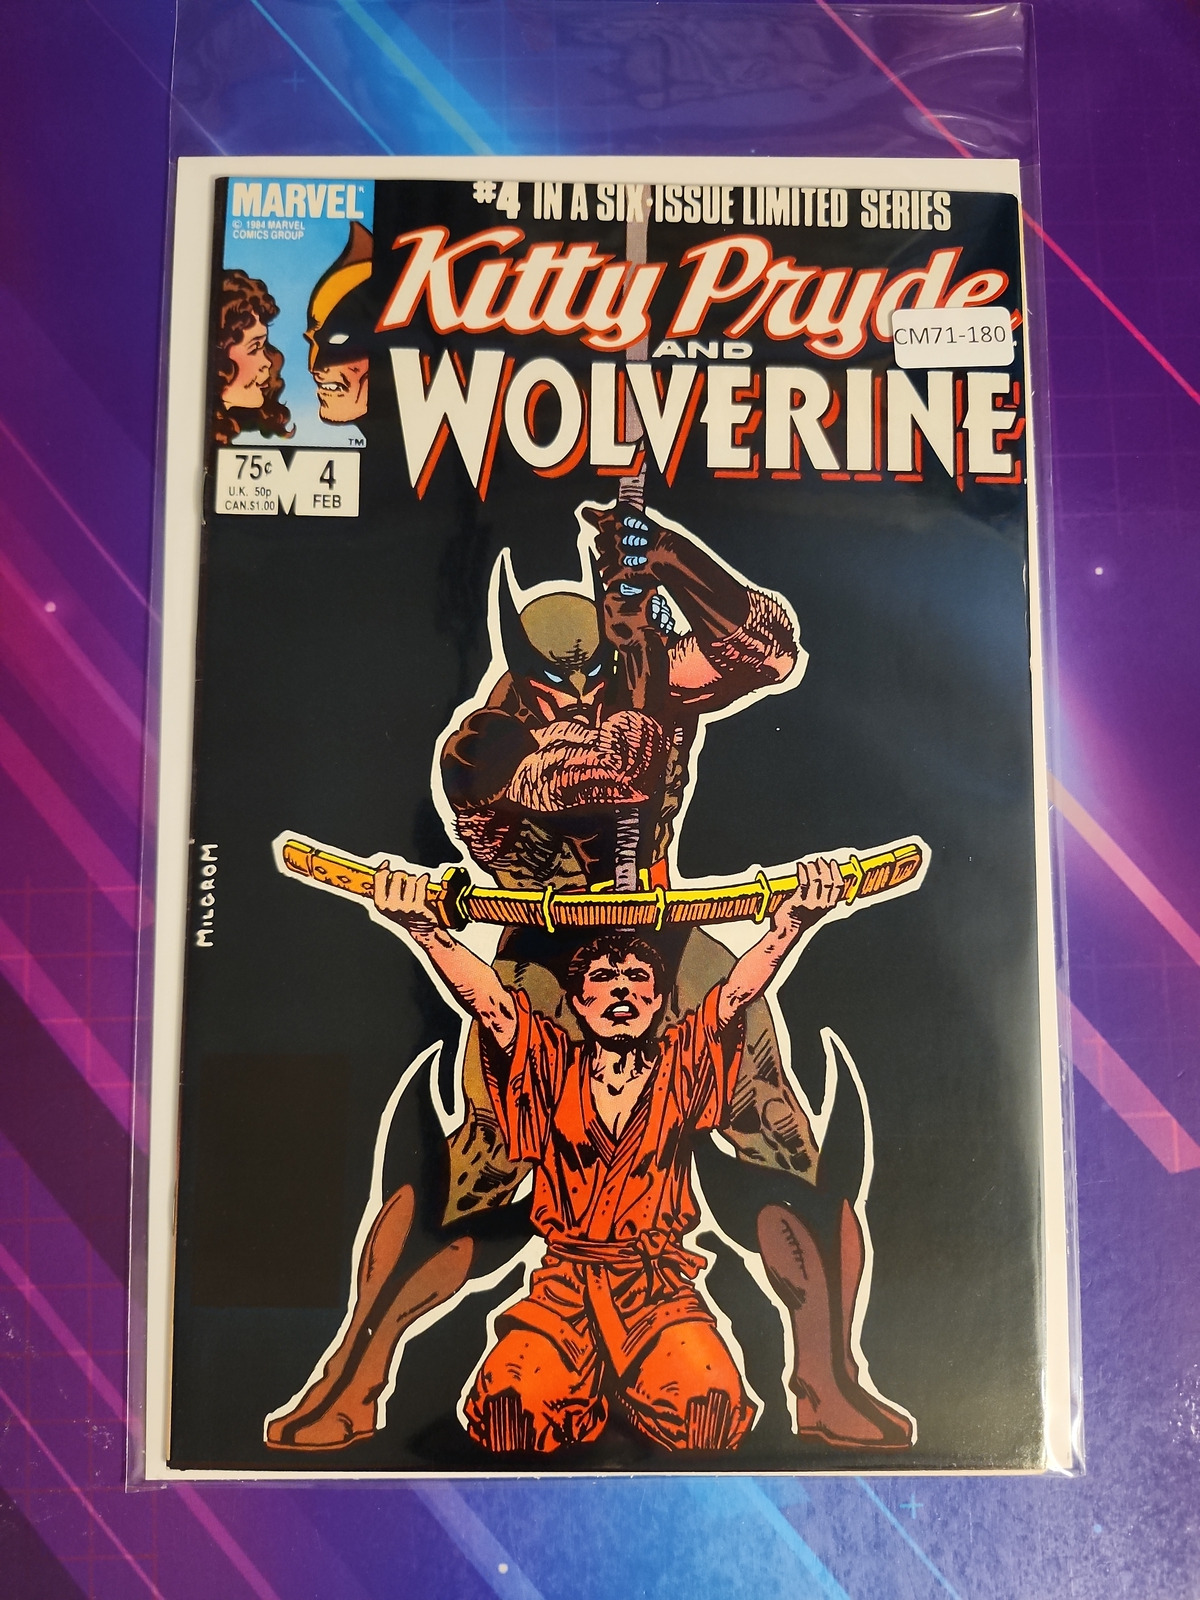 KITTY PRYDE AND WOLVERINE #4 HIGH GRADE MARVEL COMIC BOOK CM71-180